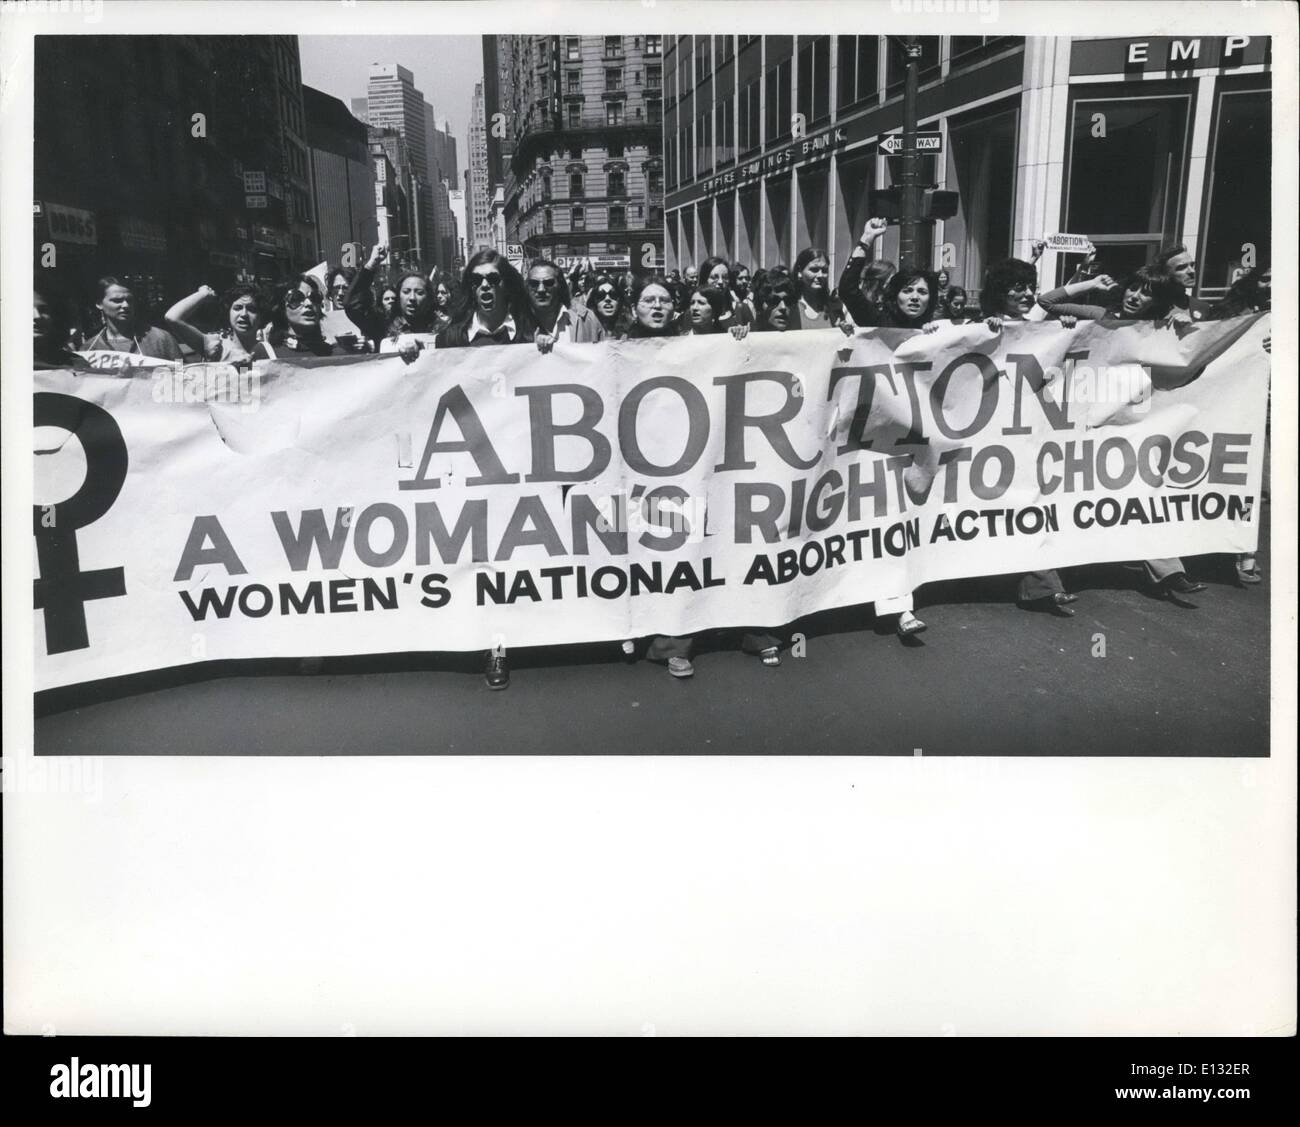 Feb. 26, 2012 - Women's Lib abortion demonstration, Union Square, NYC, May 6, 1972 Demonstration against the repeal of New York State's Abortion law. Women's Lib and other organization demonstrated at Union Square with mostly young female marchers equipped with a variety of signs, banners and buttons, for the upholding of New York's one year old Liberal abortion law. Stock Photo